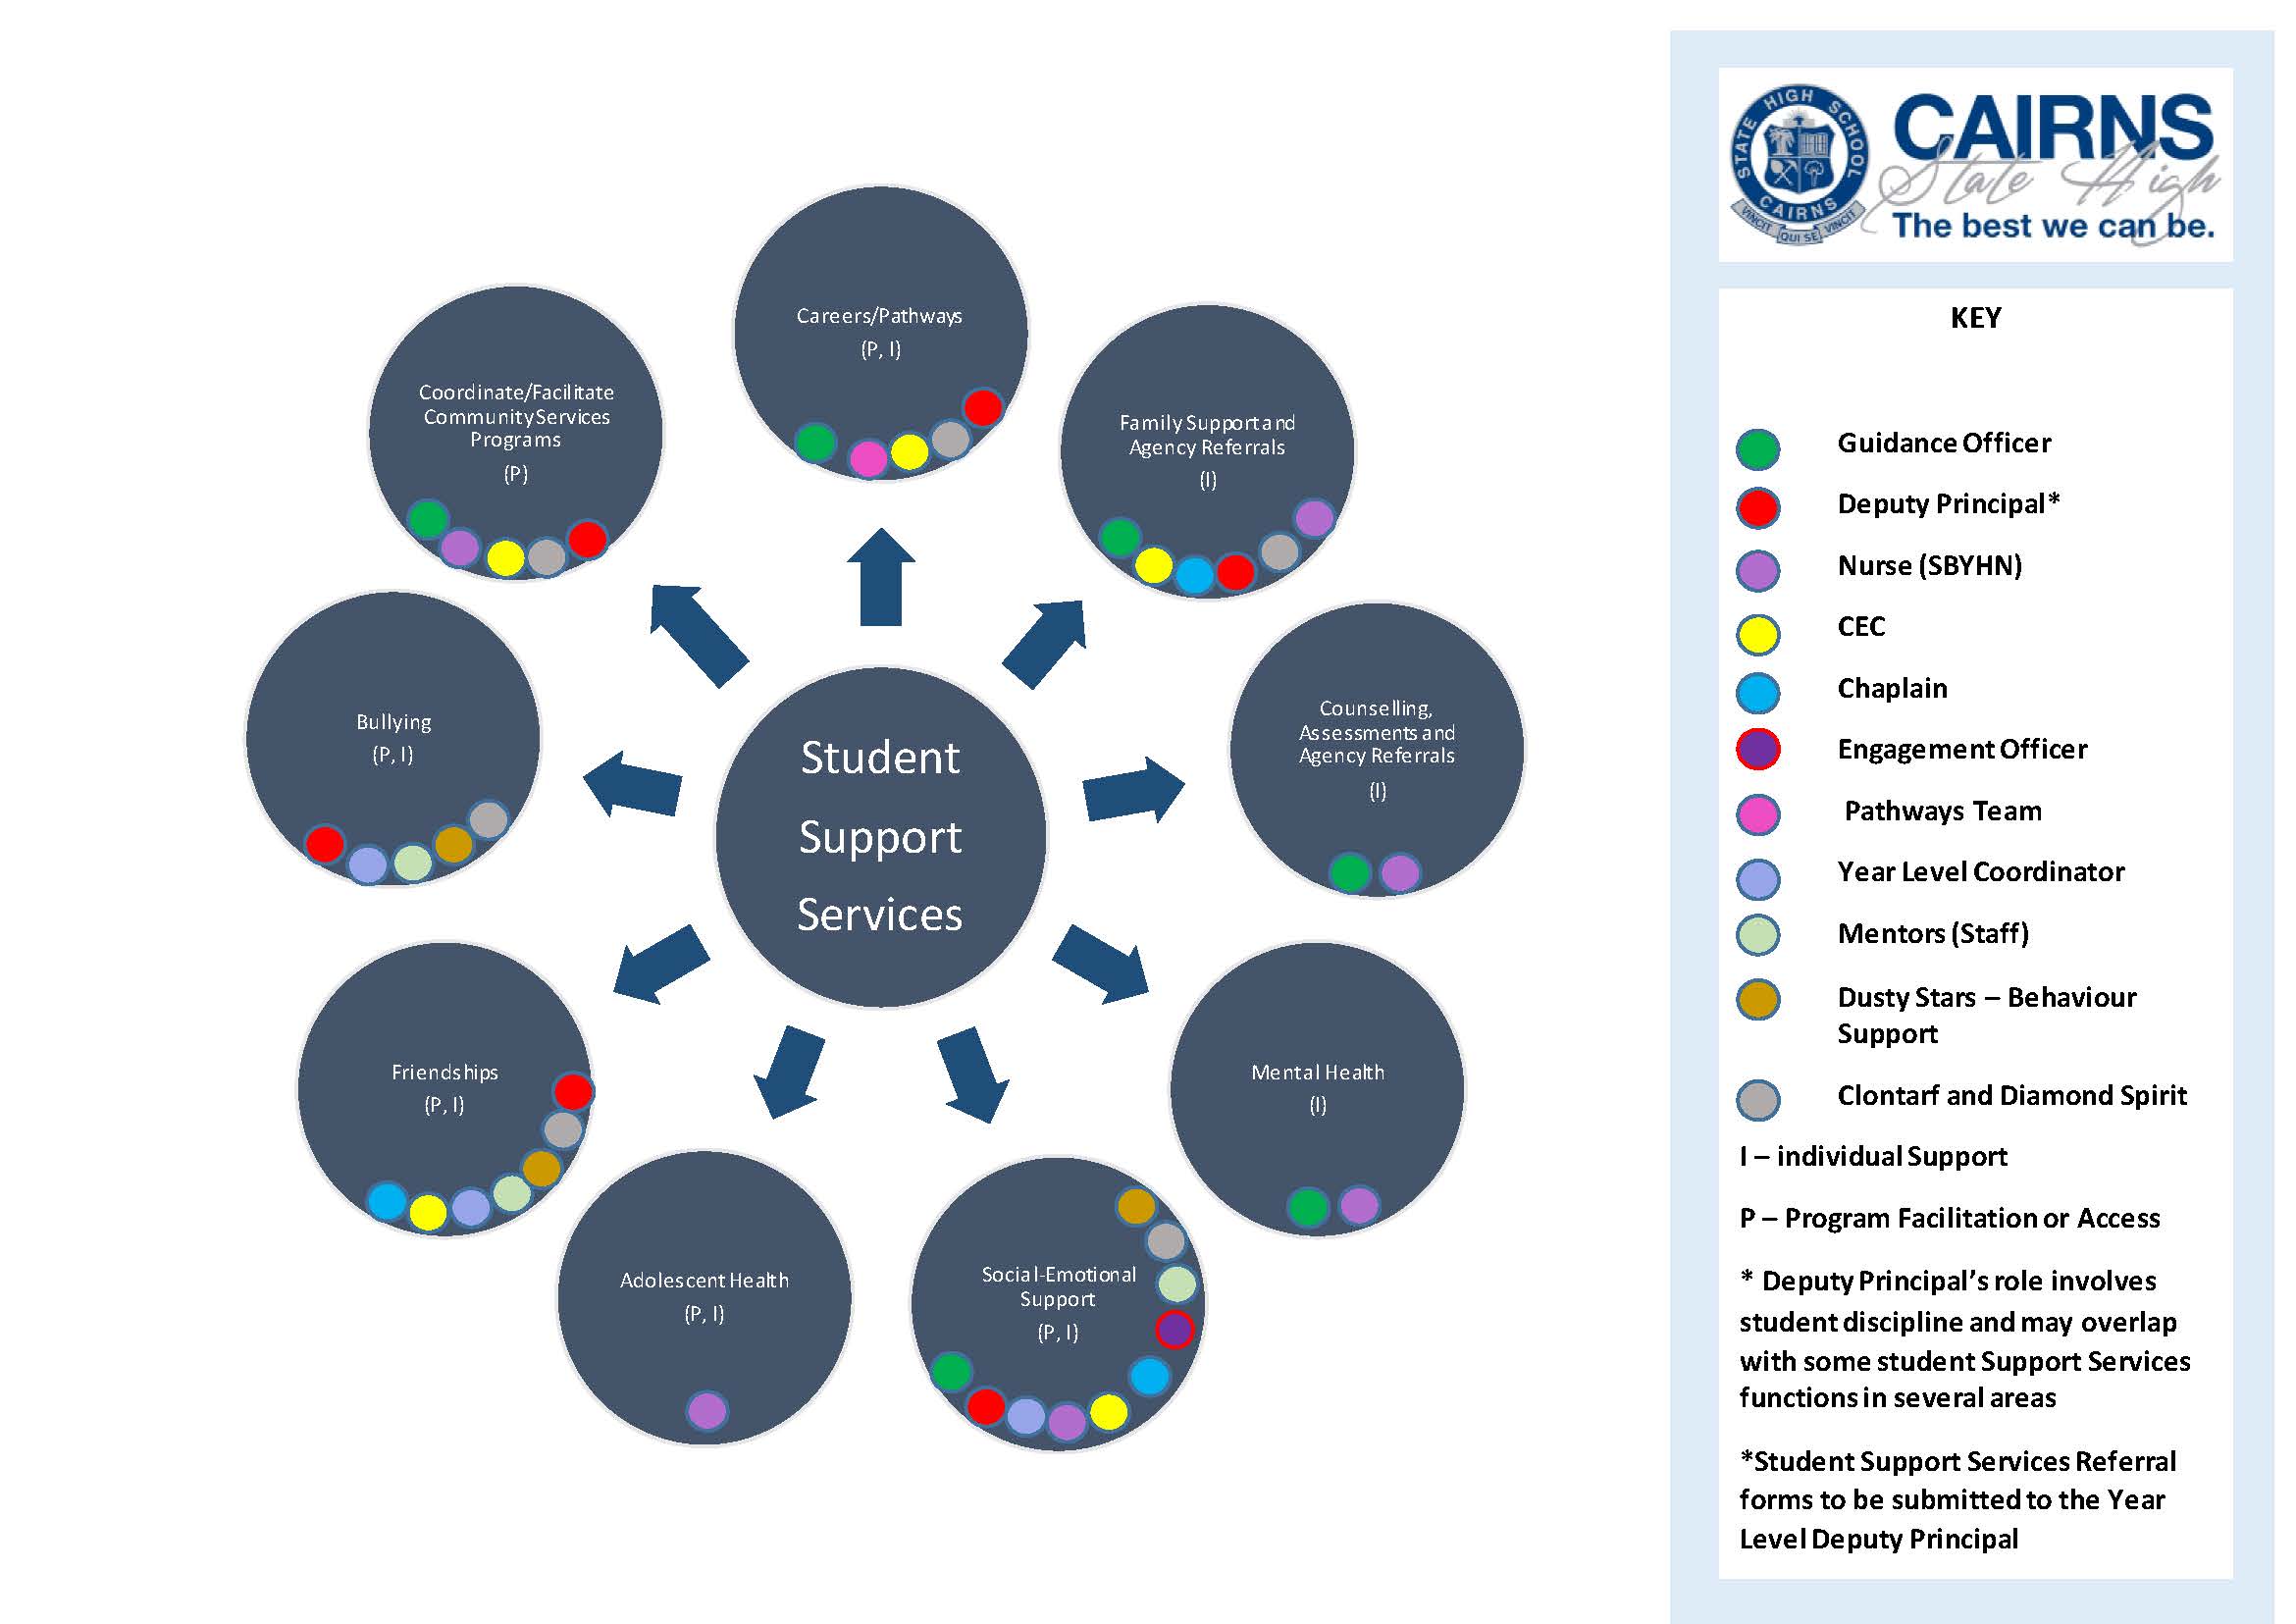 Student Support Services functions